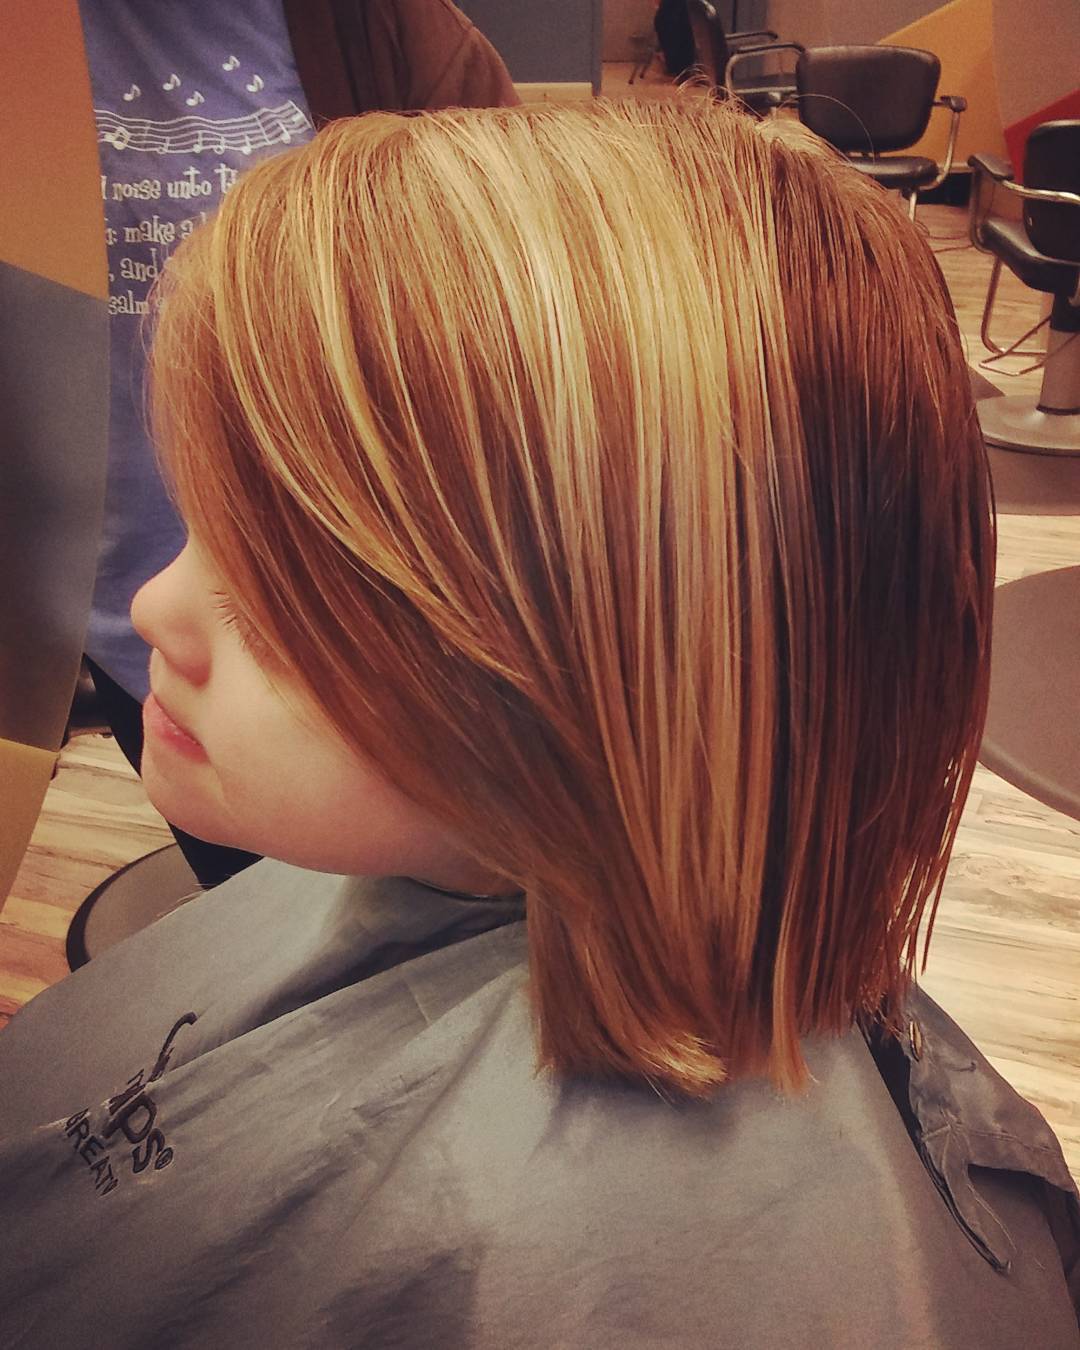 45 Dapper Haircut for Small Girls that are on fleek